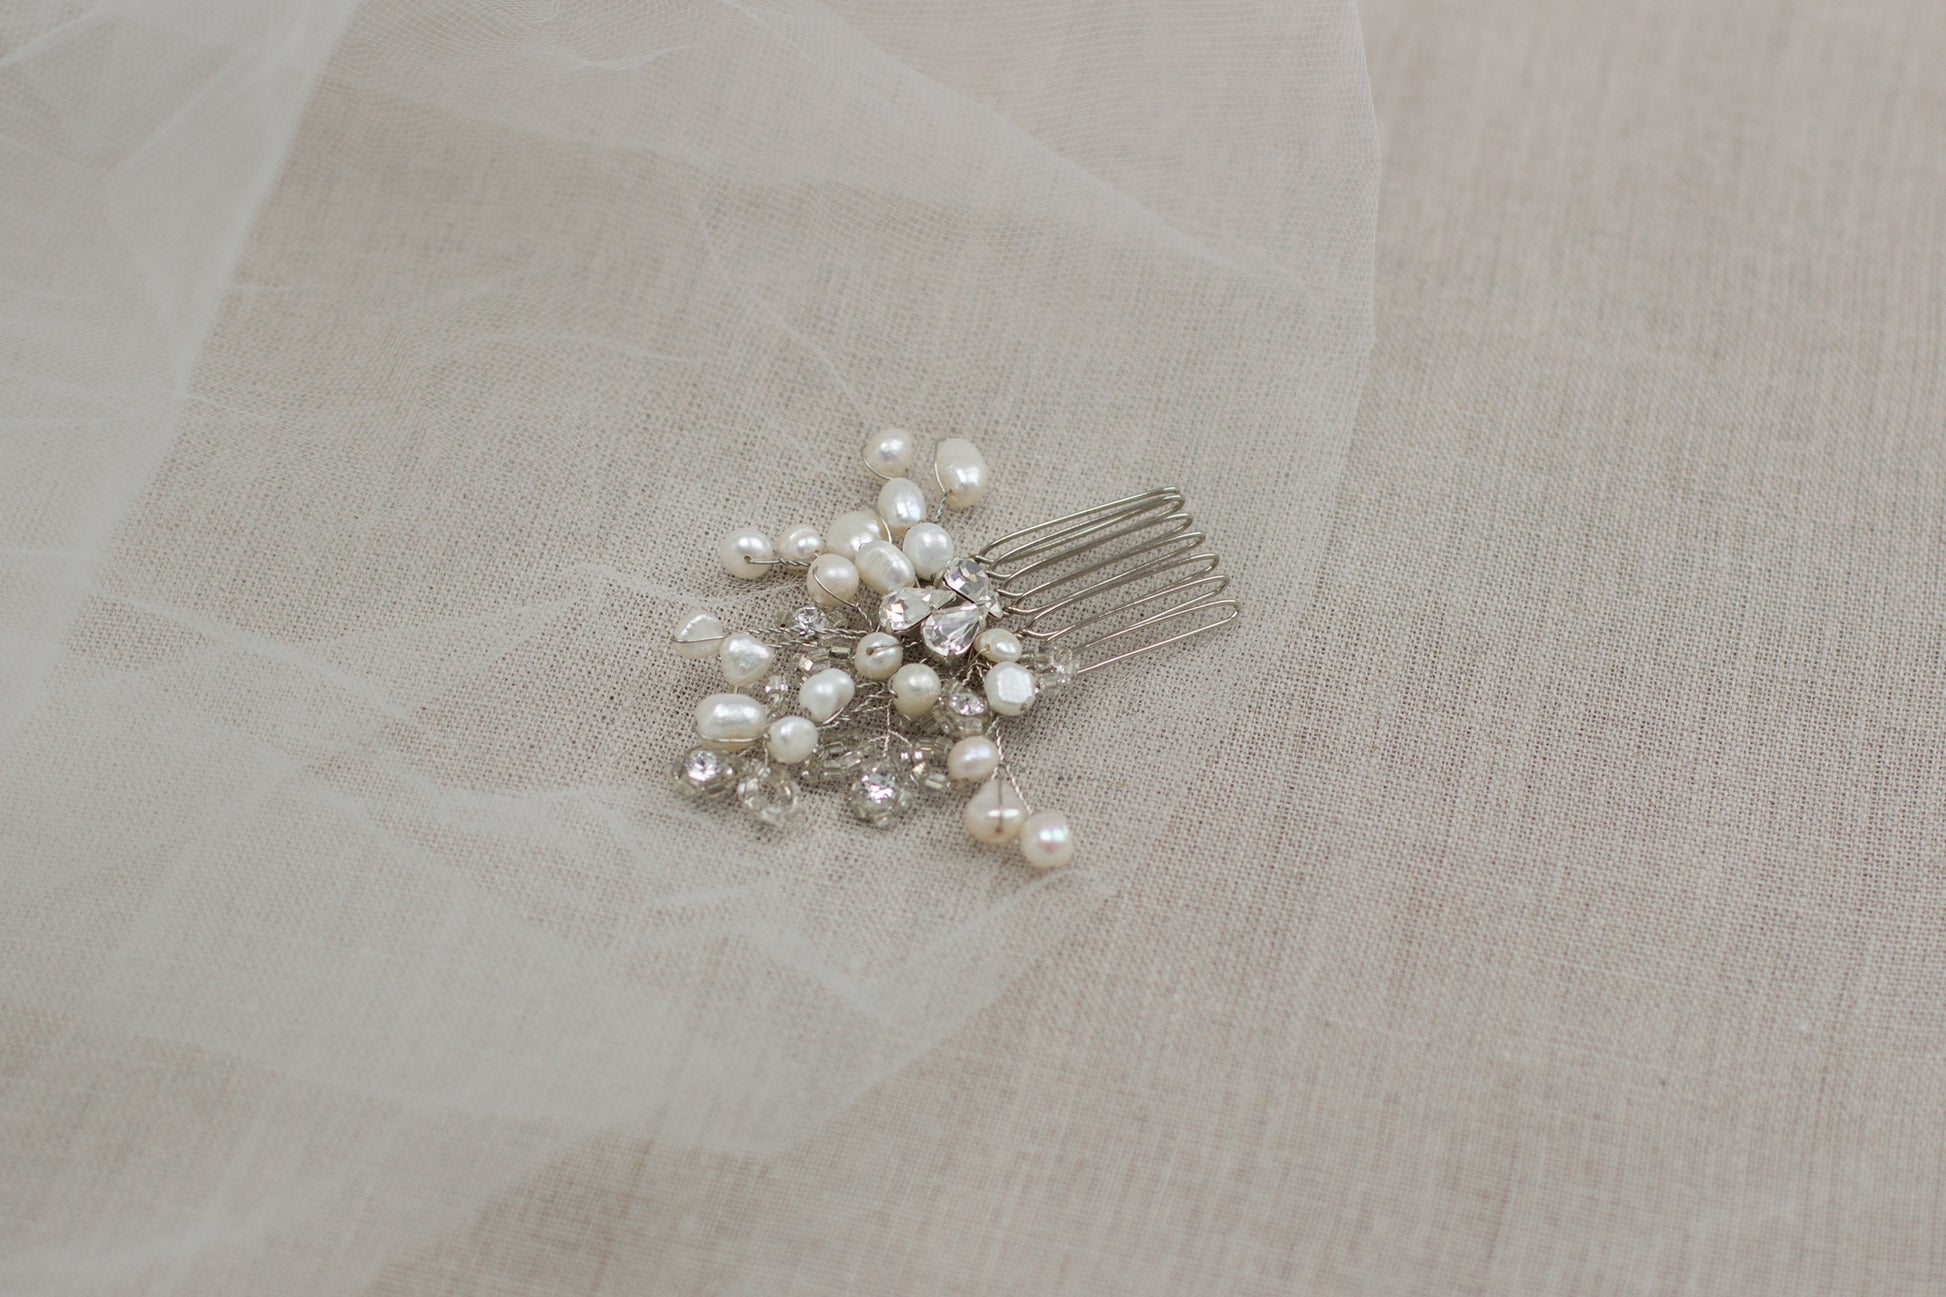 Check out our unique handmade wedding hair accessories at online bridal boutique in Europe. One of a kind bridal hair comb. Small pearl wedding headpiece. Freshwater pearl hair comb. Wedding hair piece features pearl twigs. Hair adornment.